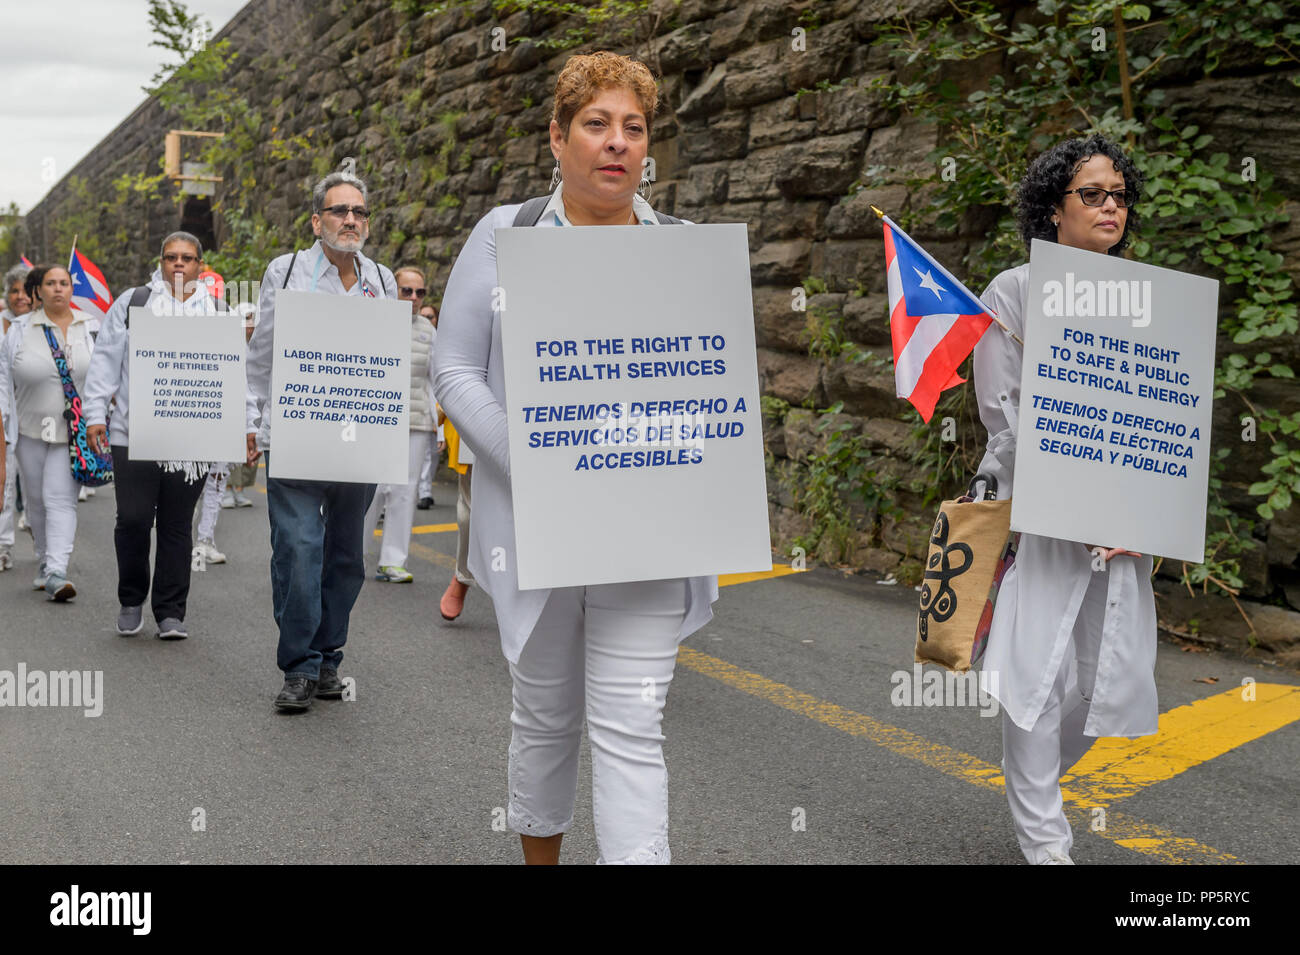 New York, United States. 23rd Sep, 2018. Hundreds of New Yorkers dressed in white participated on a silent procession through the streets of New York on September 23, 2018 to focus the nation's attention on this callous and craven neglect of U.S. Citizens in Puerto Rico still struggling for survival in the aftermath of Hurricane Maria. Participants walked 2.5 miles in unity, and in silence; from East Harlem to Trump Tower. Credit: Erik McGregor/Pacific Press/Alamy Live News Stock Photo